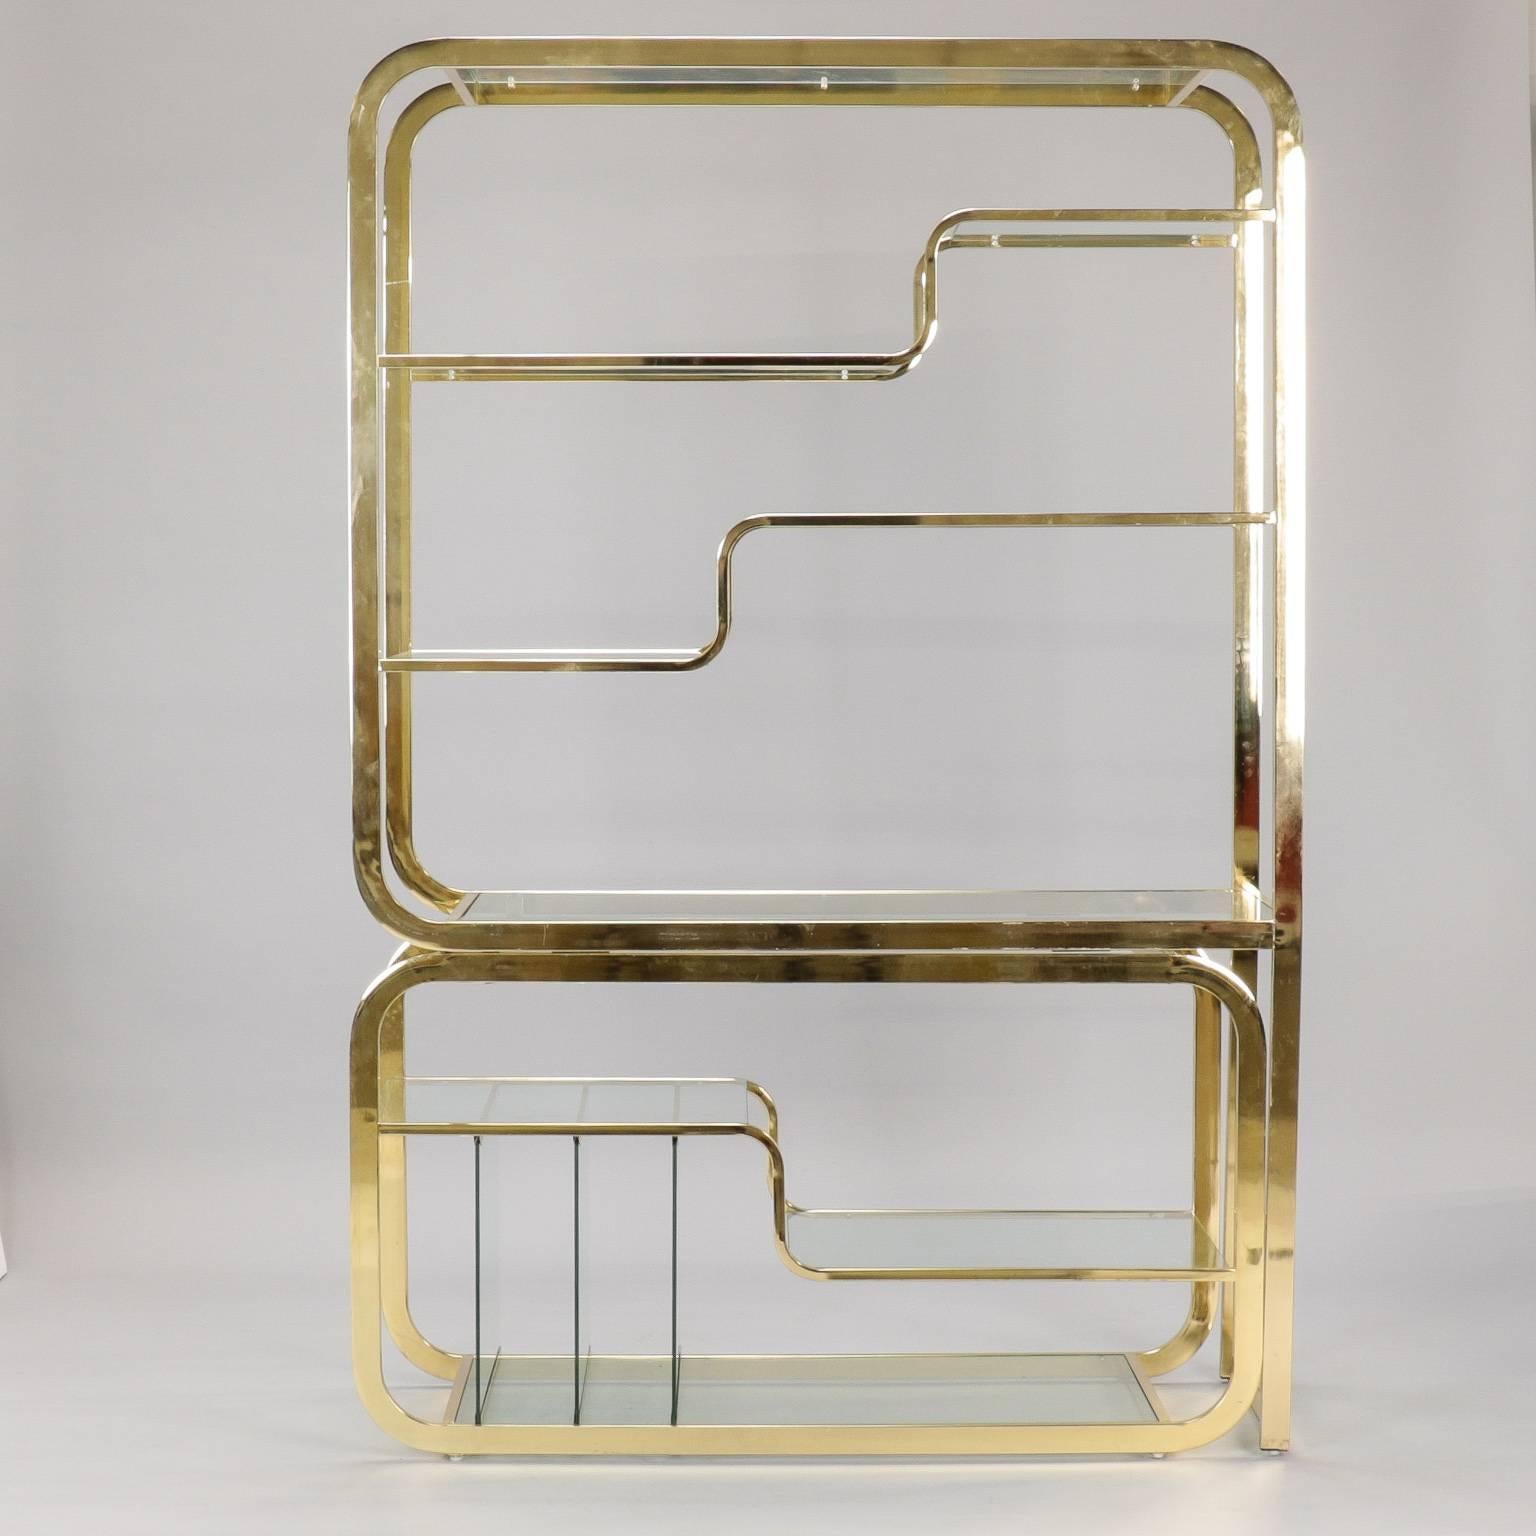 Brass and glass shelf unit by Milo Baughman for Design Institute of America. Can be configured as shown in photos or base can slide out to make it approximately 18” wider. Very good overall vintage condition with some scattered surface scratches to